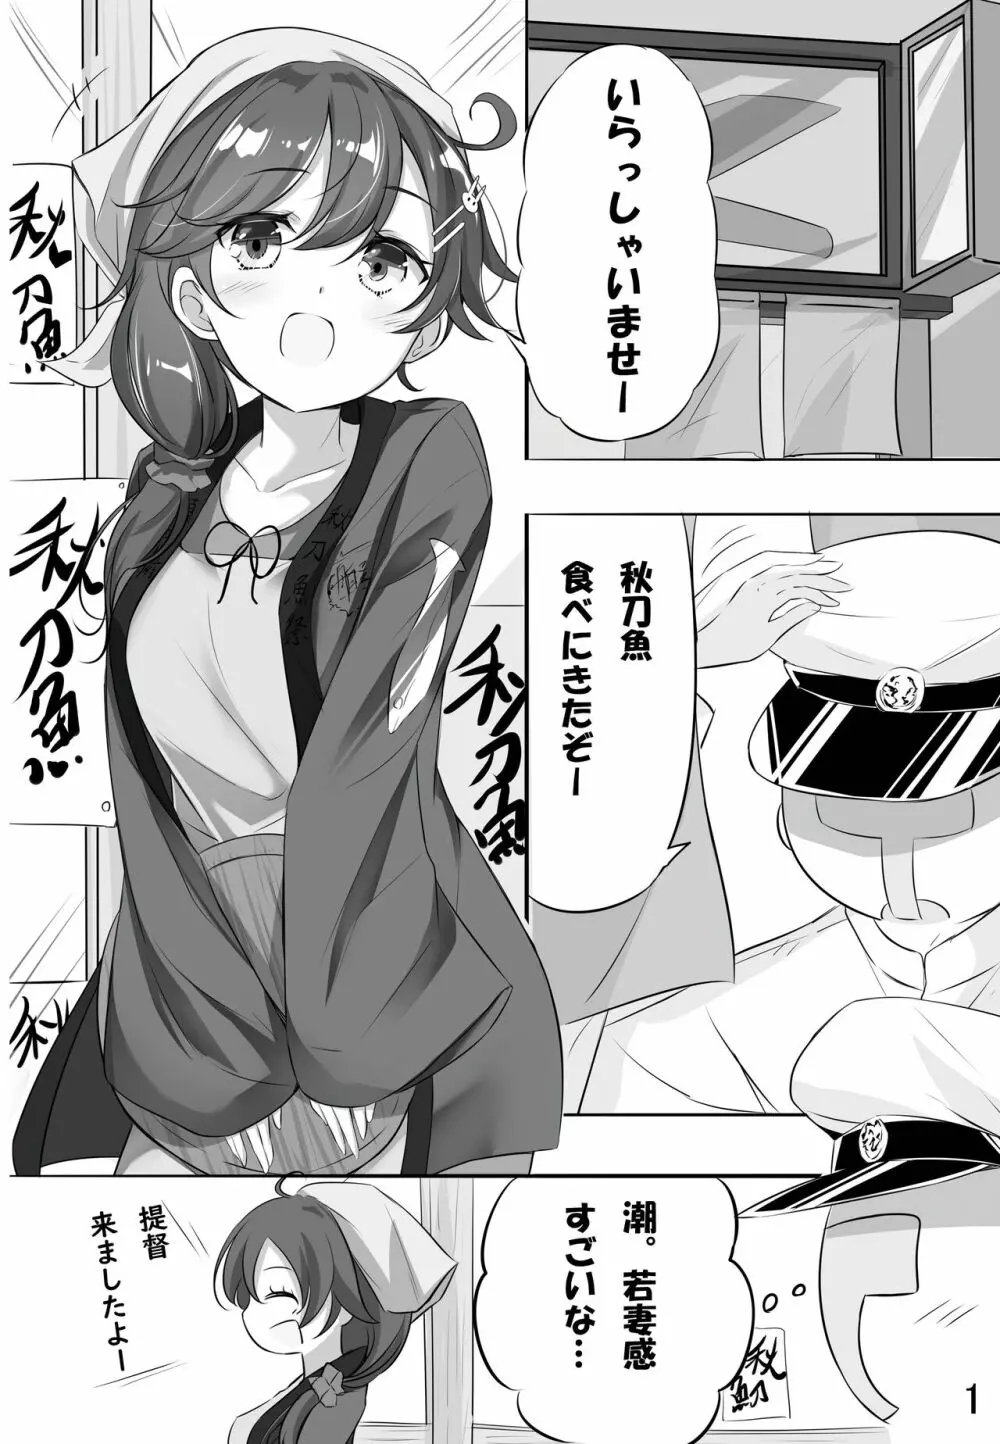 hamaken collection 総集編vol 9～12 プラス 七駆の乳くらべ - page68